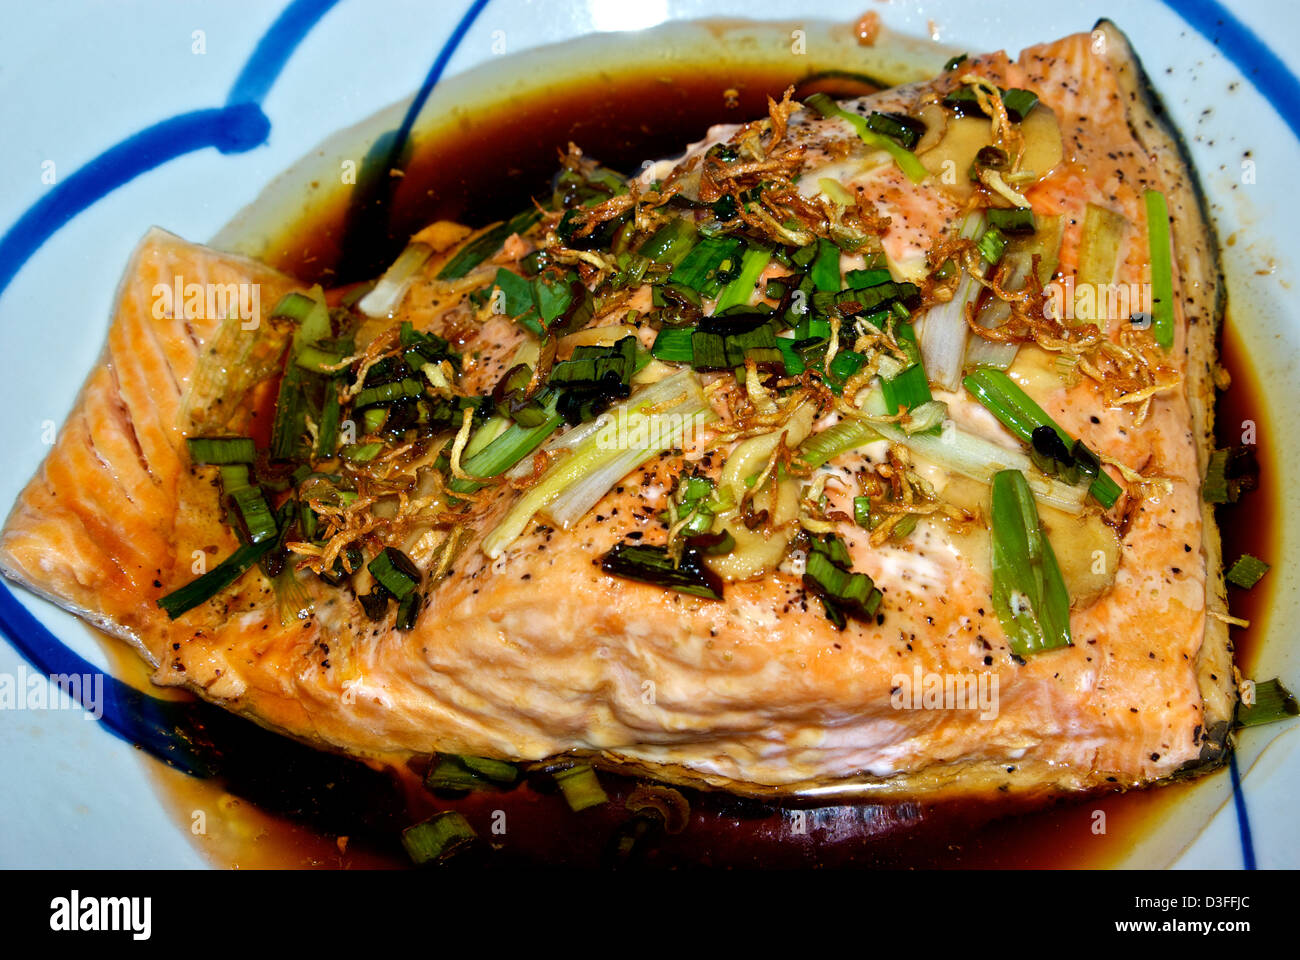 Steamed Asian style fish fillet green onion fried ginger slivers soya sauce Stock Photo